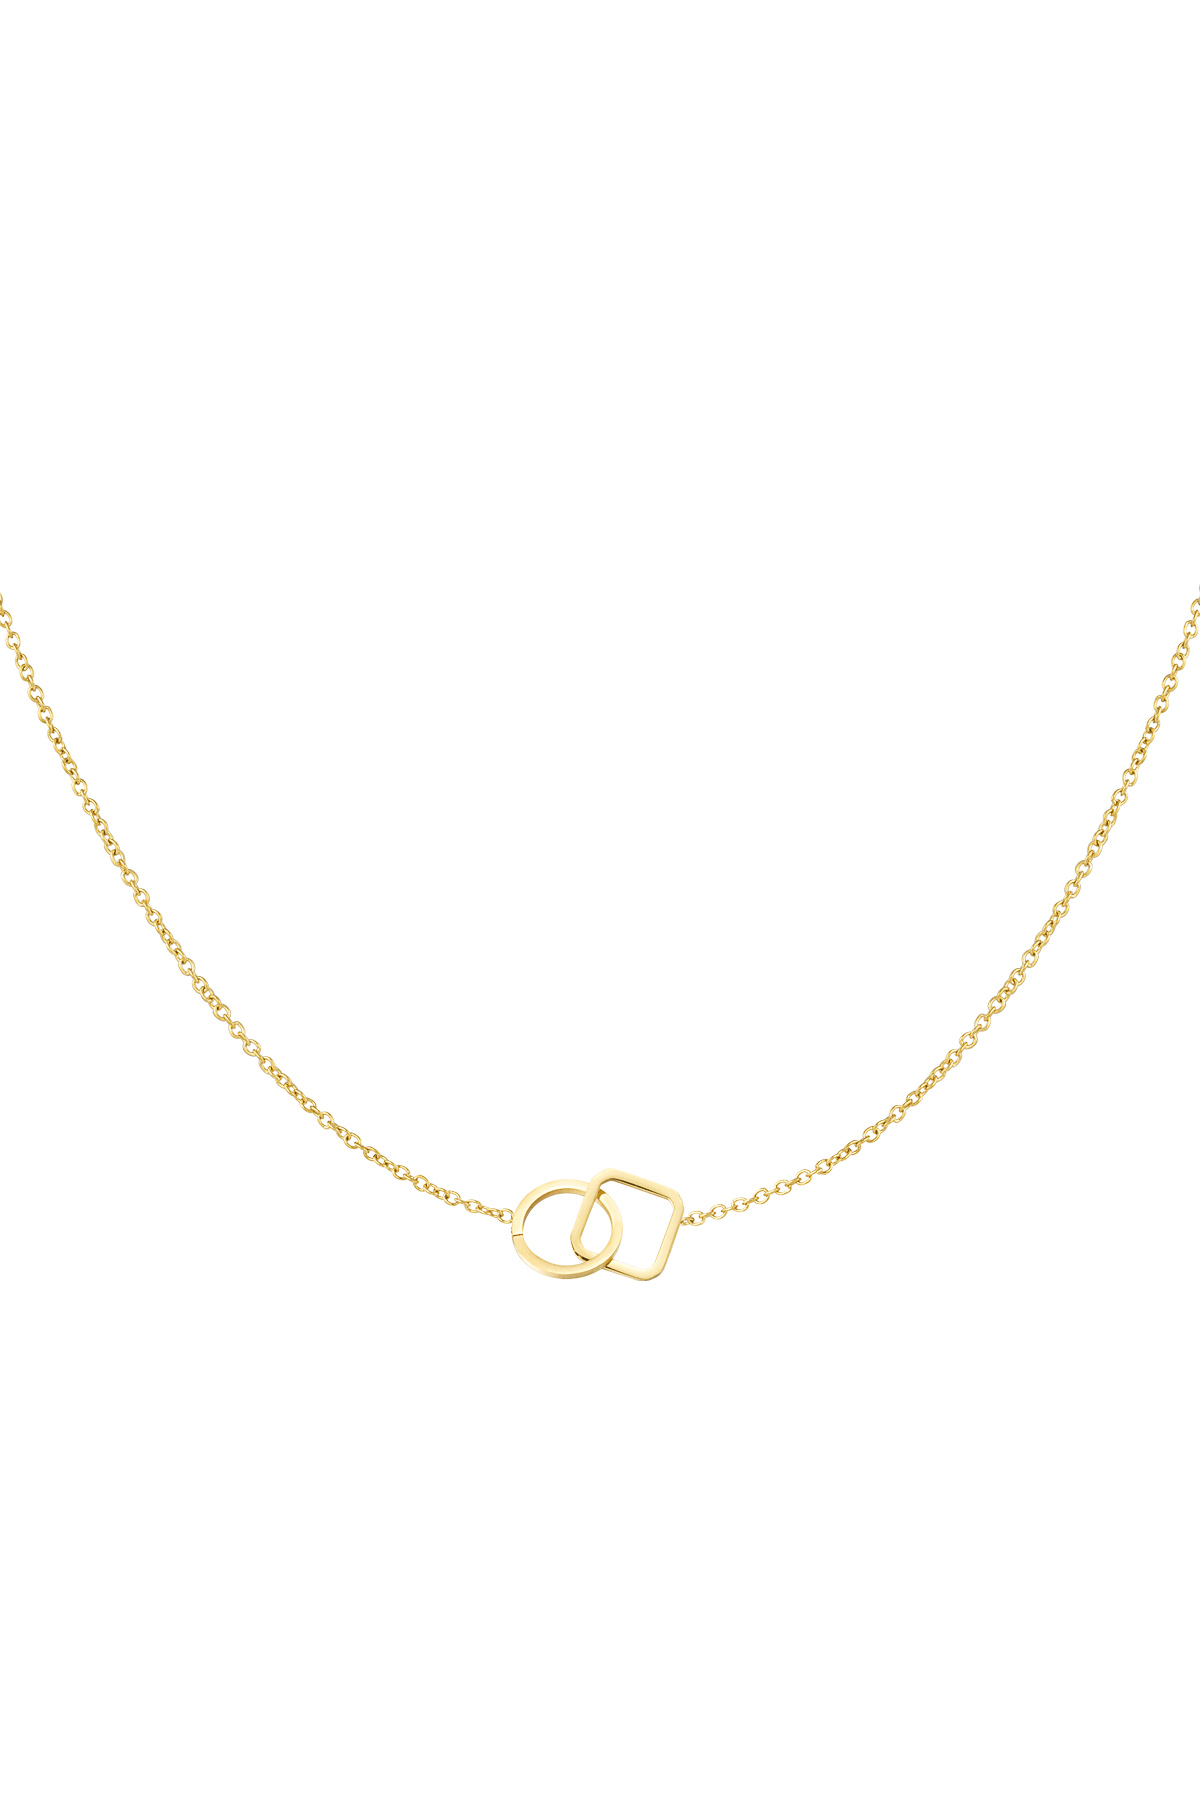 Chain connected square & round - gold